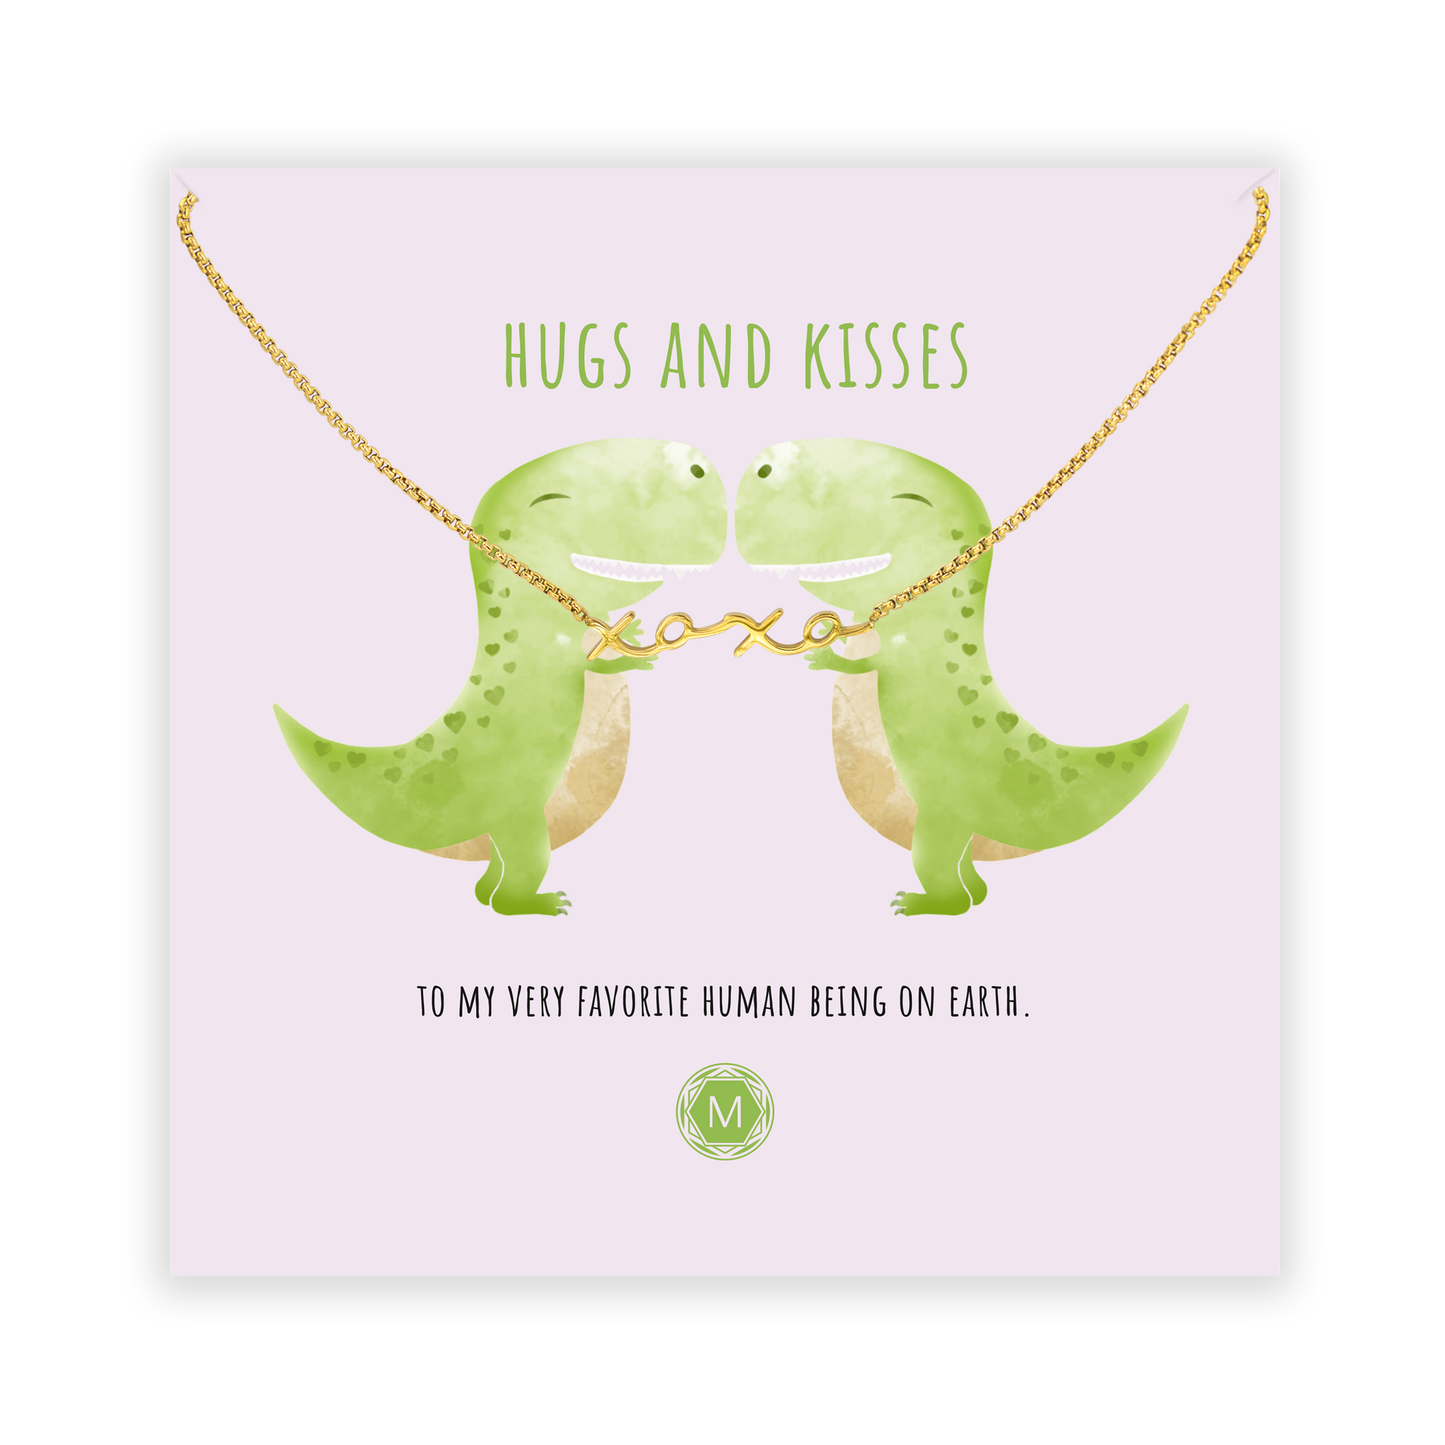 HUGS AND KISSES Necklace